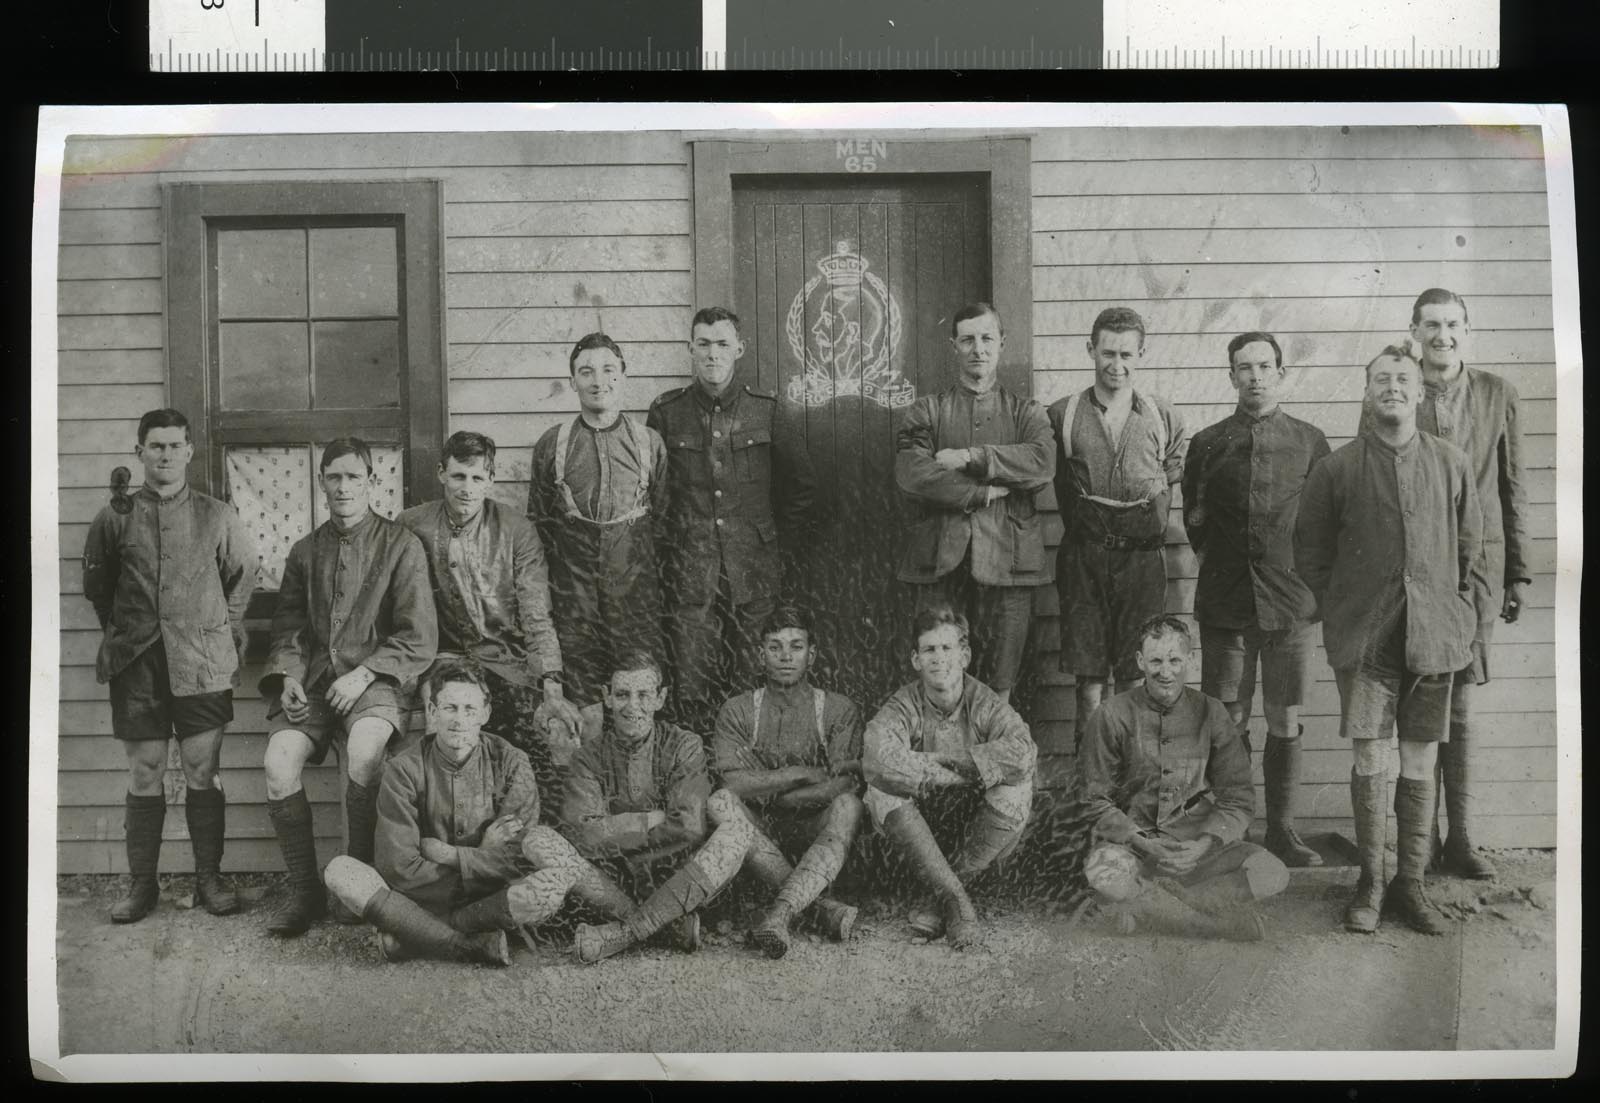 Frank Prestidge (service no. 34727) and a group of other unidentified men, circa 1916